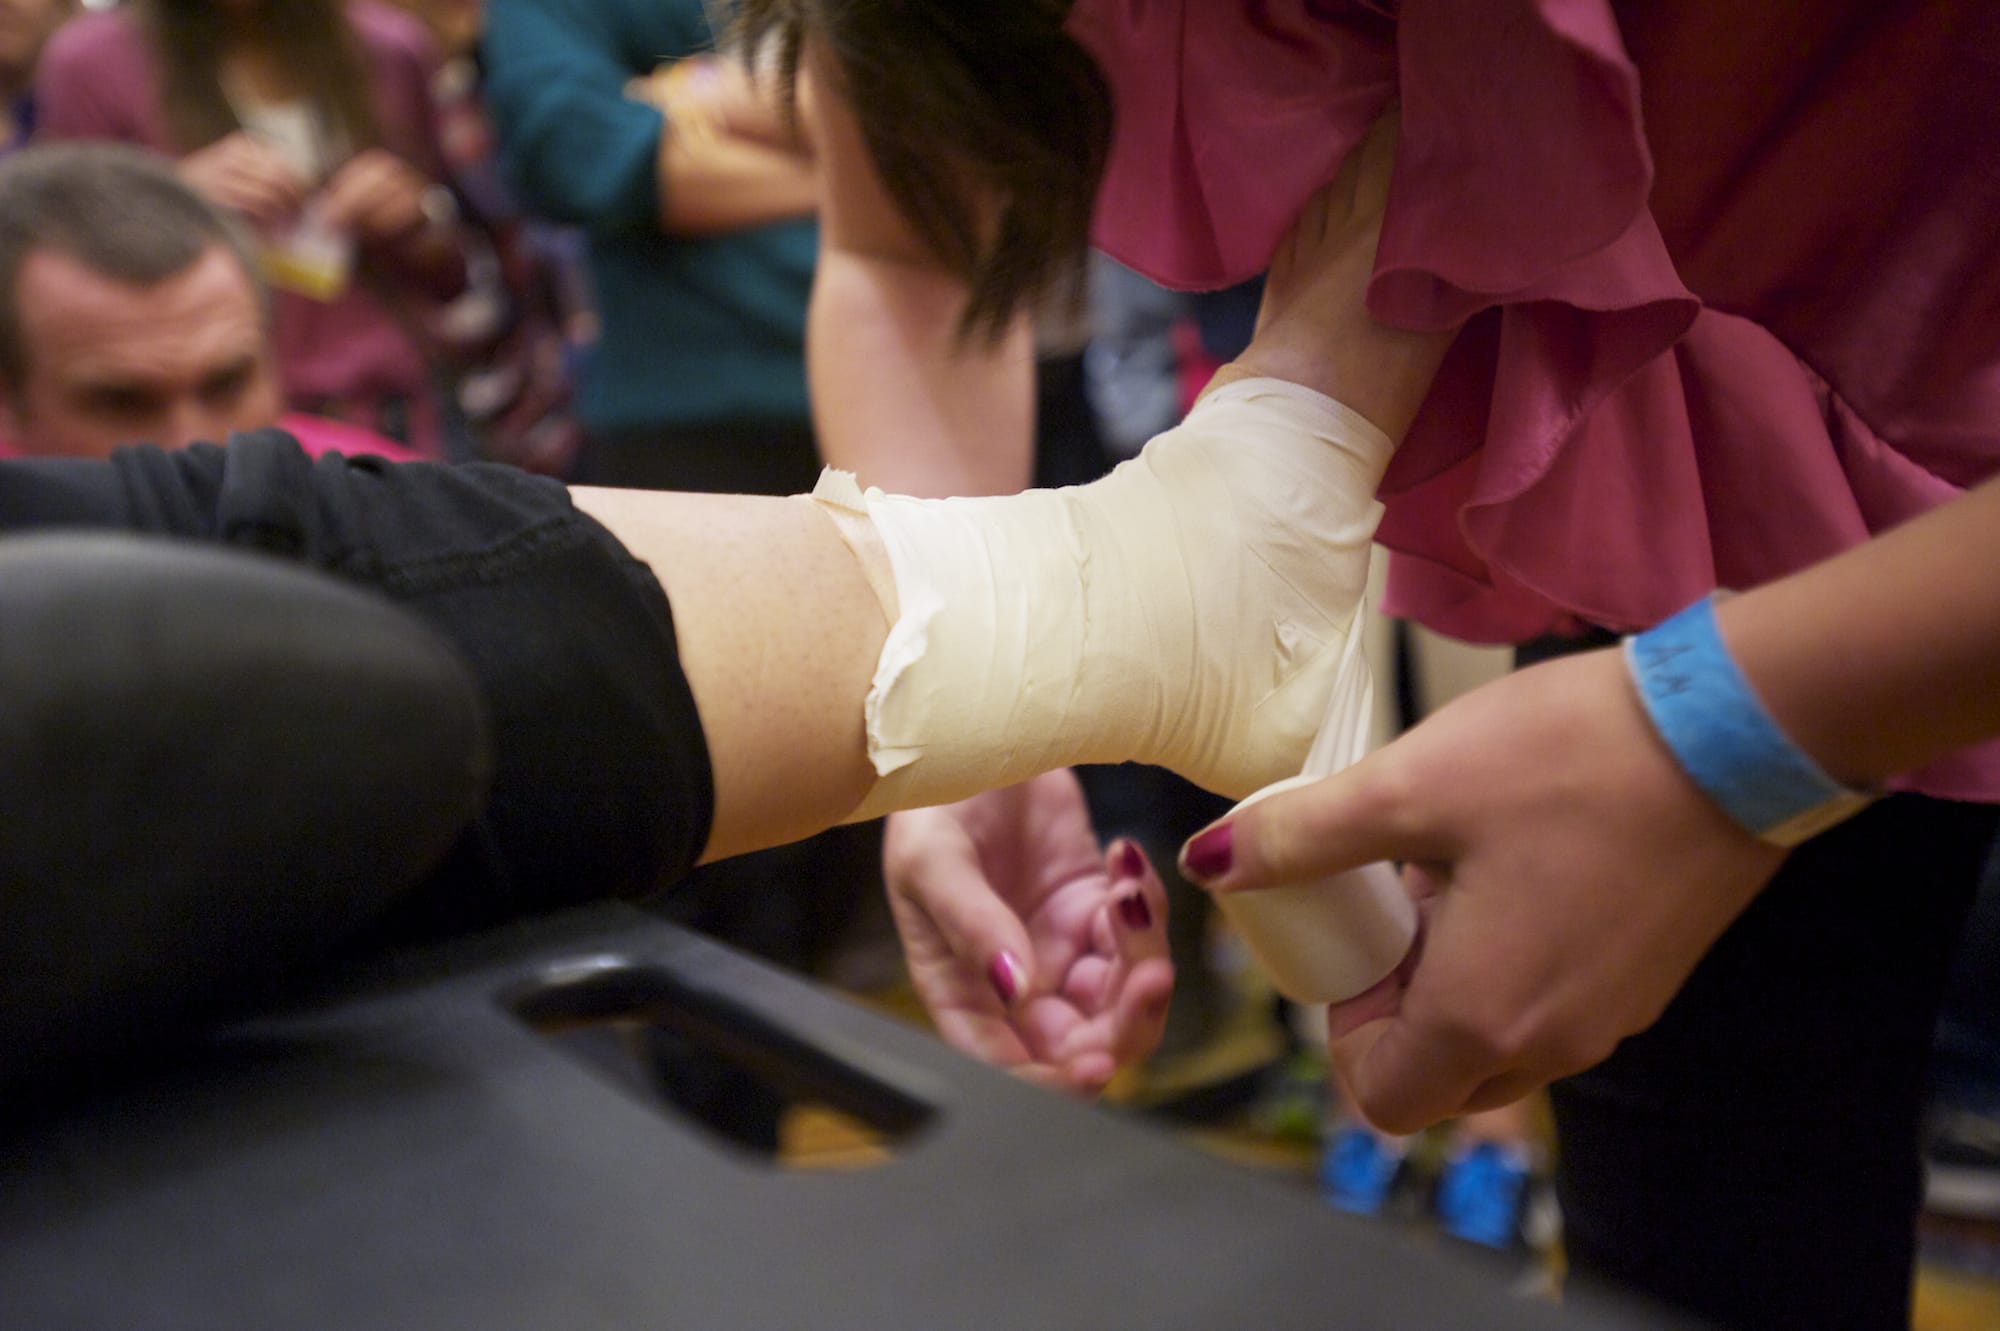 Students compete Saturday in a timed ankle-taping event at the Washington Career and Technical Sports Medicine Association's State Sports Medicine Competition and Symposium at the Hilton Vancouver Washington.